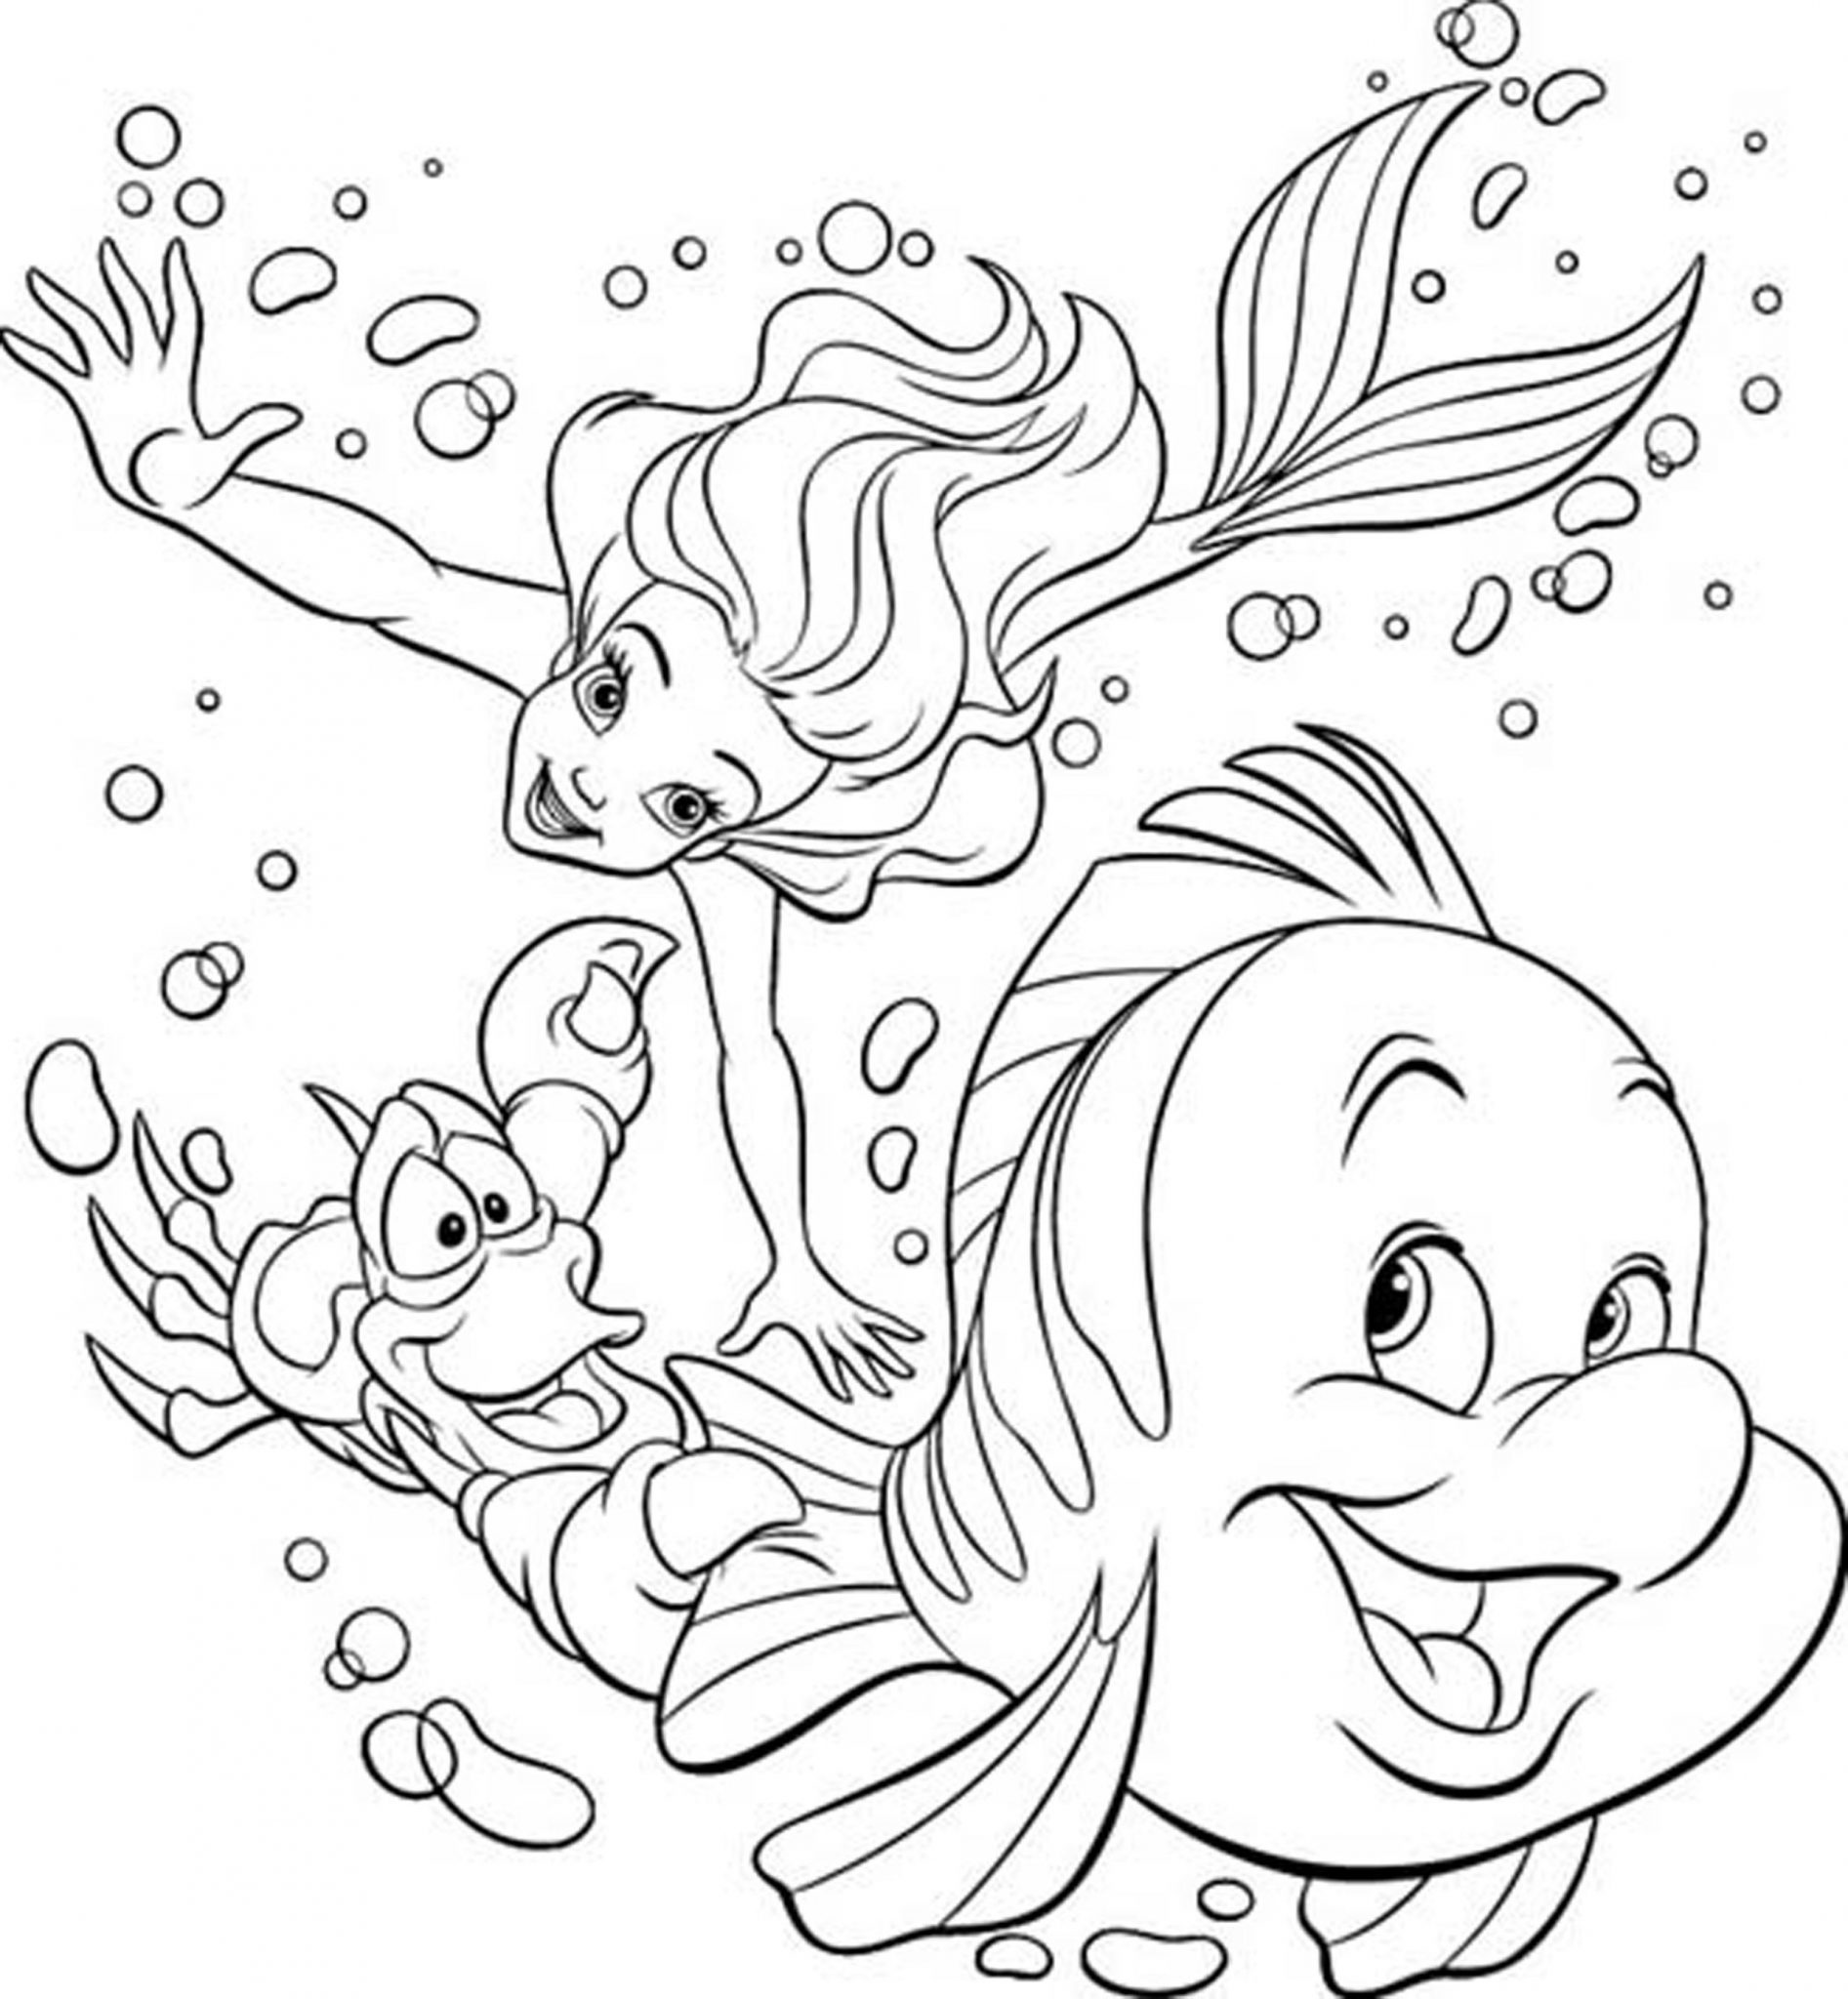 disney-printable-coloring-pages-free